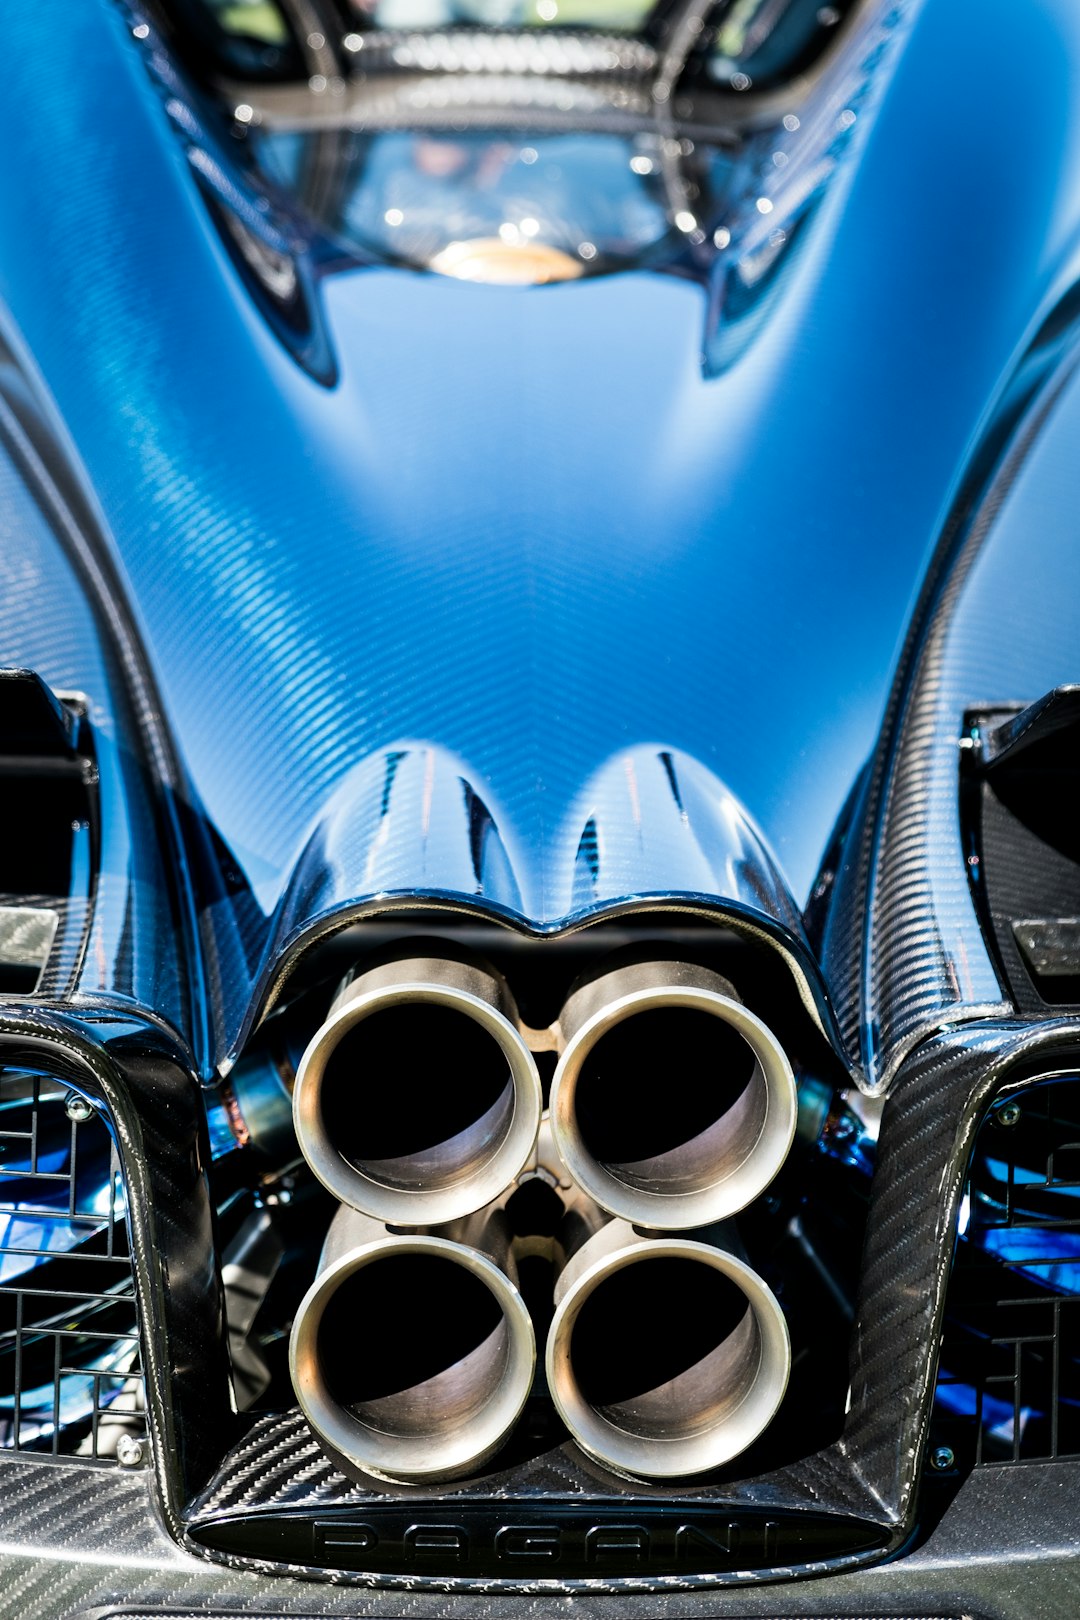 Carbon fiber and exhaust pipes on the Pagani supercar